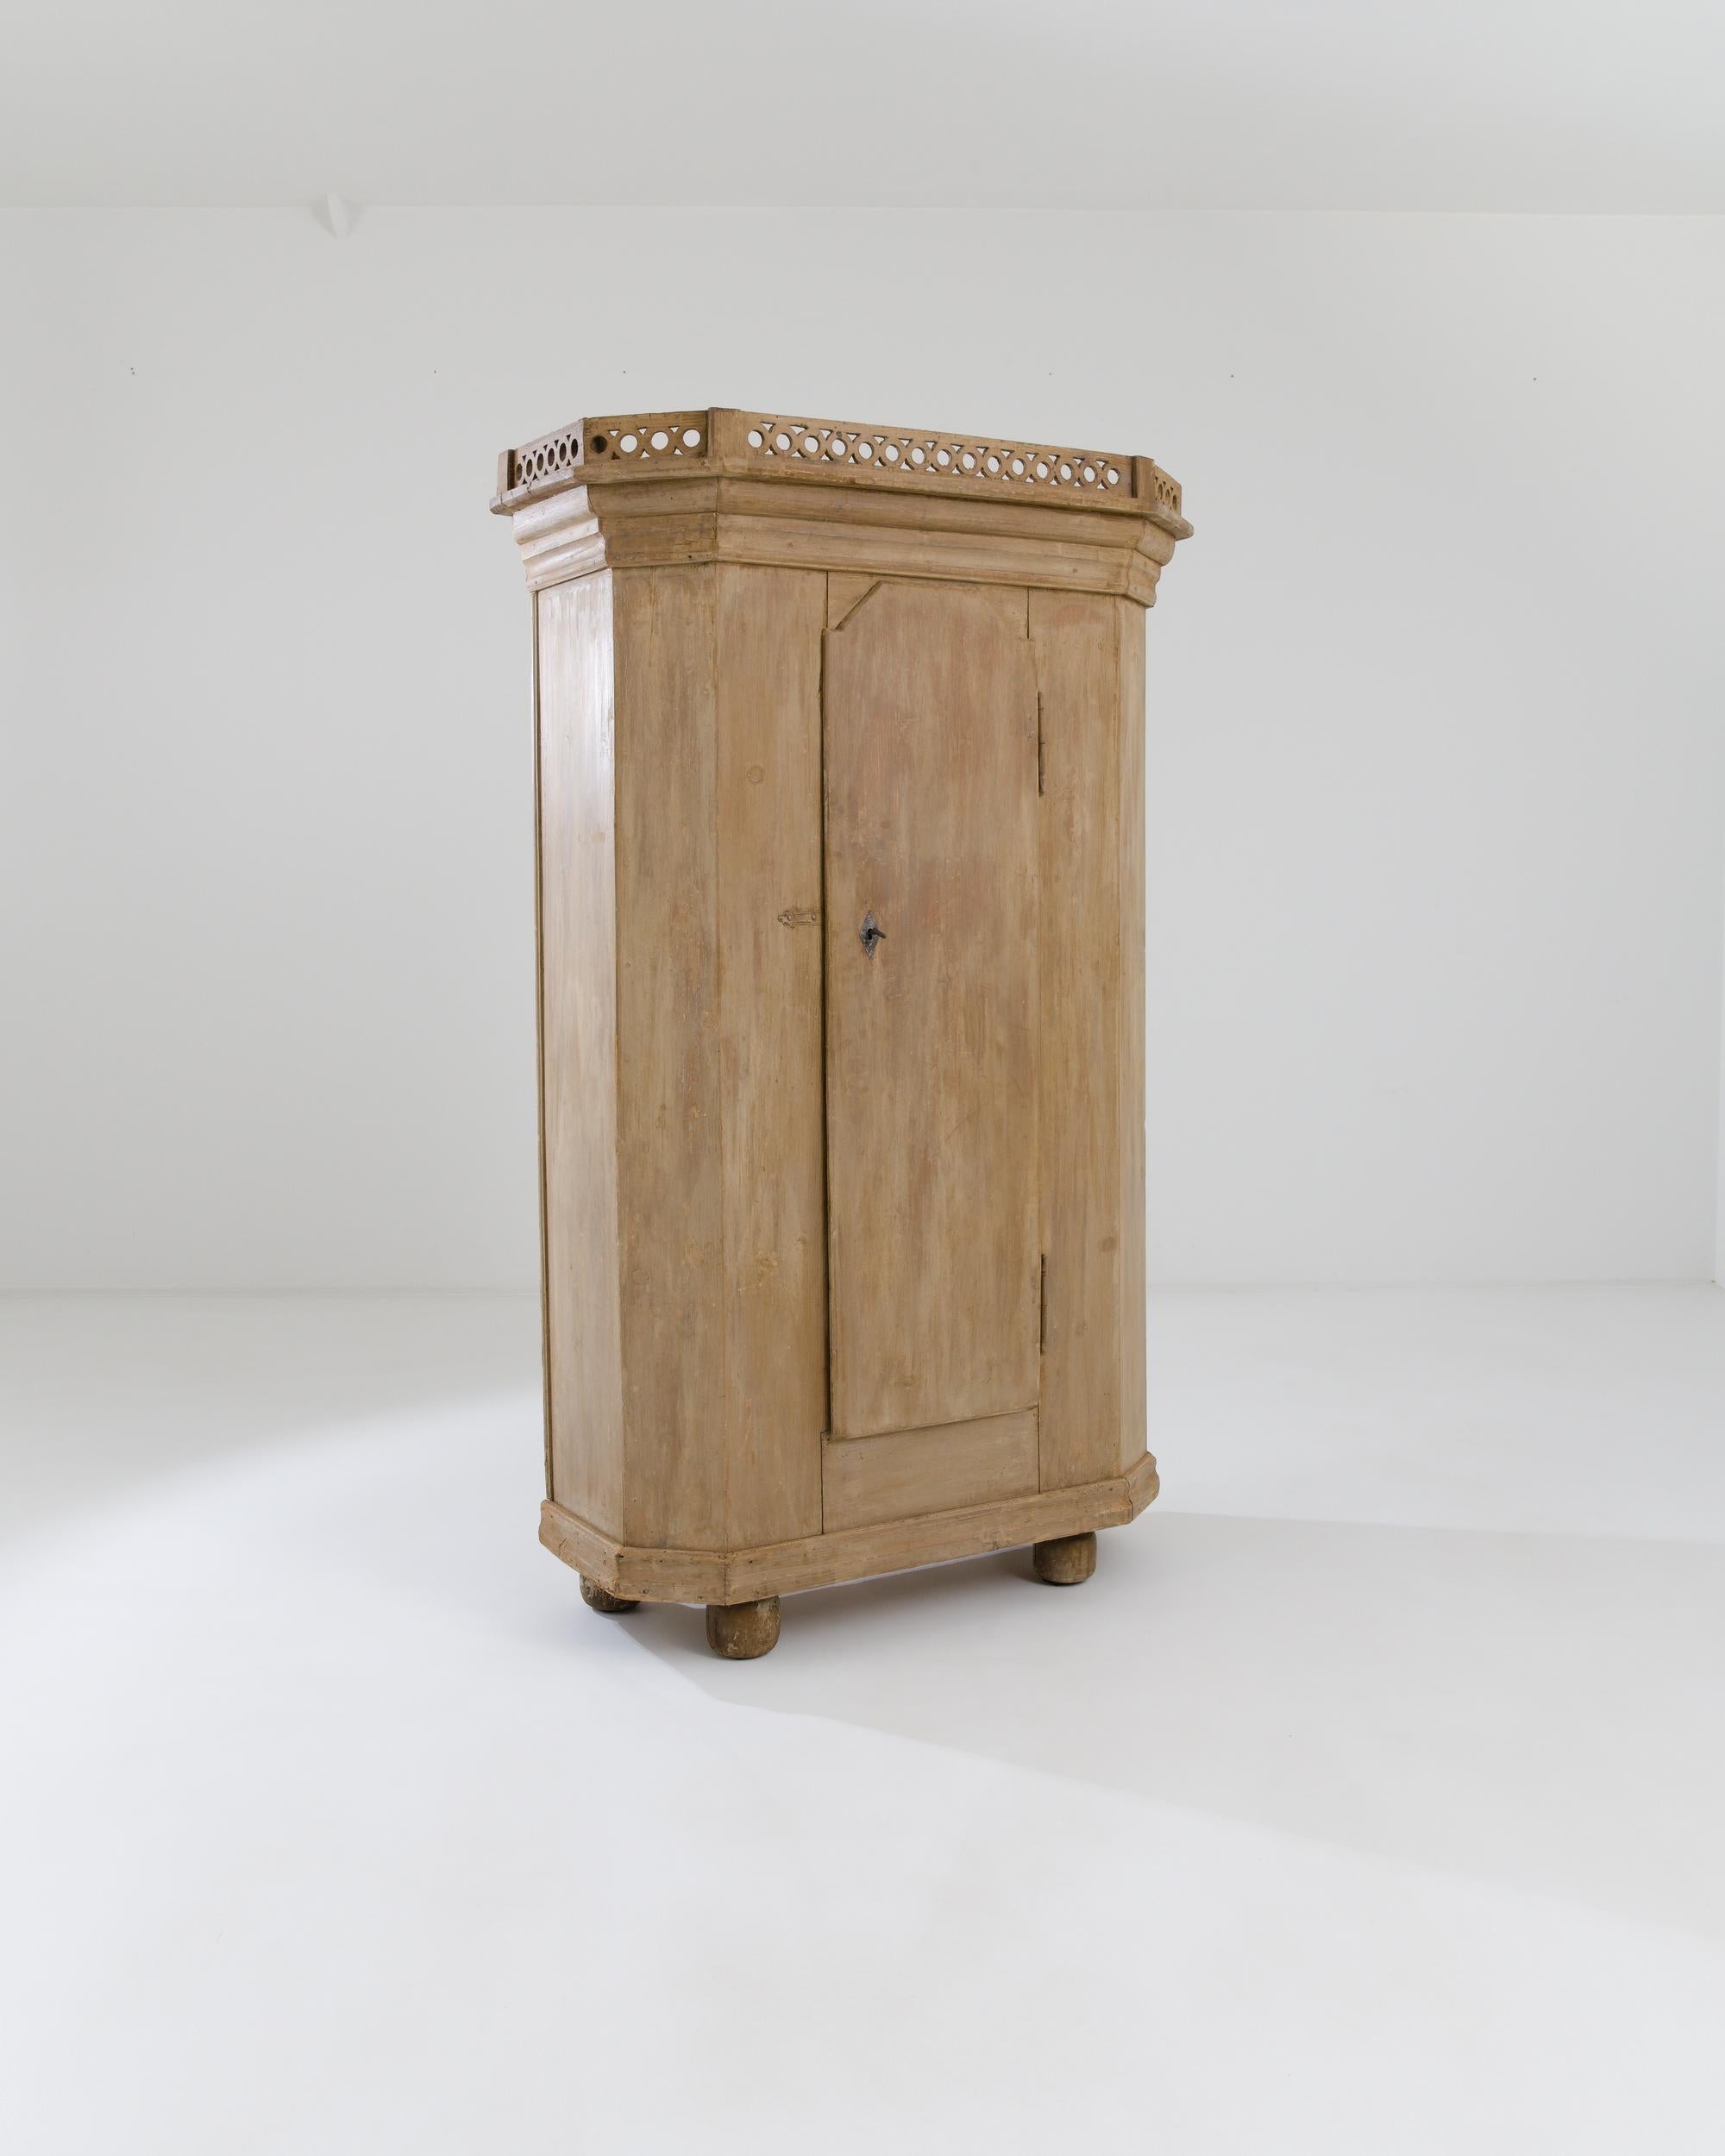 A wooden cabinet made in 20th century Scandinavia. With a sturdy, wide stance, rounded feet, and top resembling a castle wall, this curious cabinet emits a powerful yet homely and approachable aura. Its fortress-like door swings outward to reveal a